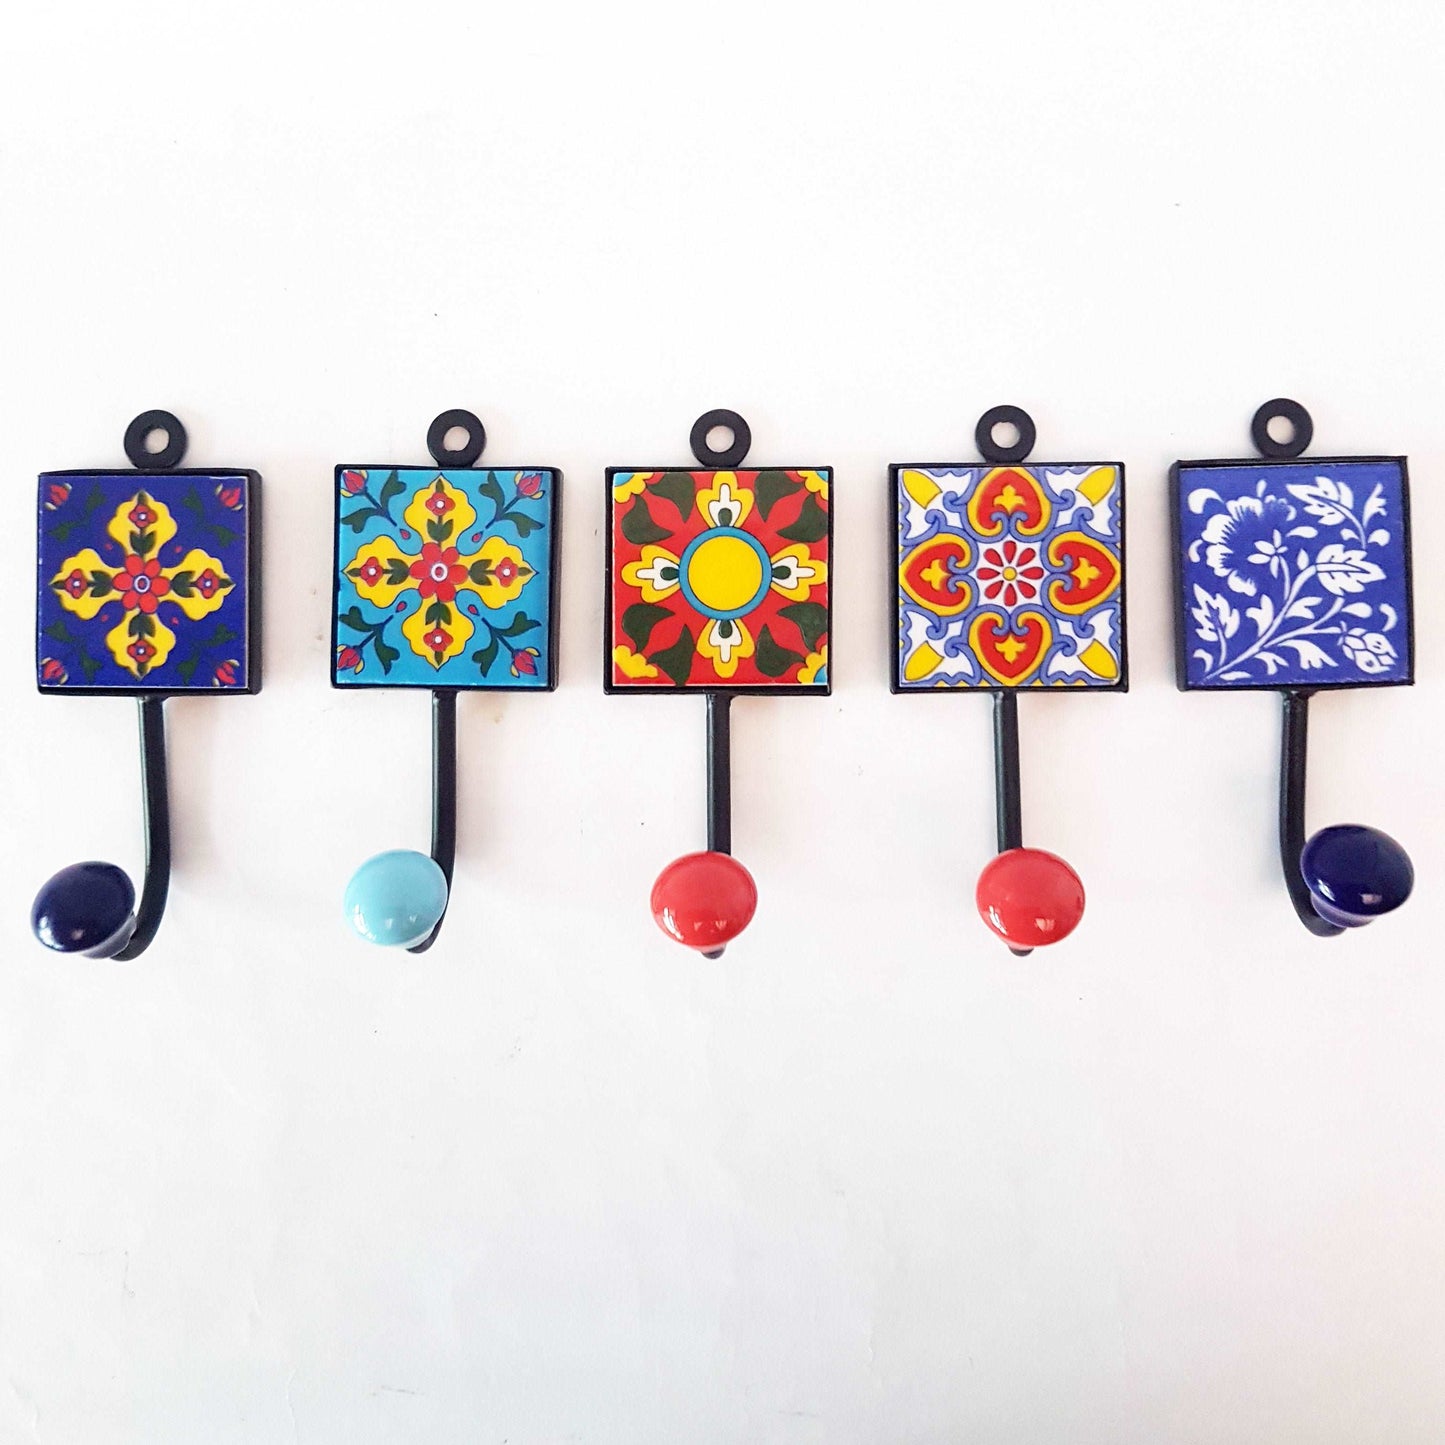 5 Coat hooks-wall hook hangers for decorative home decor. Corfu exclusive collection of 5 hand painted ceramic hooks . Sturdy 4.5 by 2 inch.